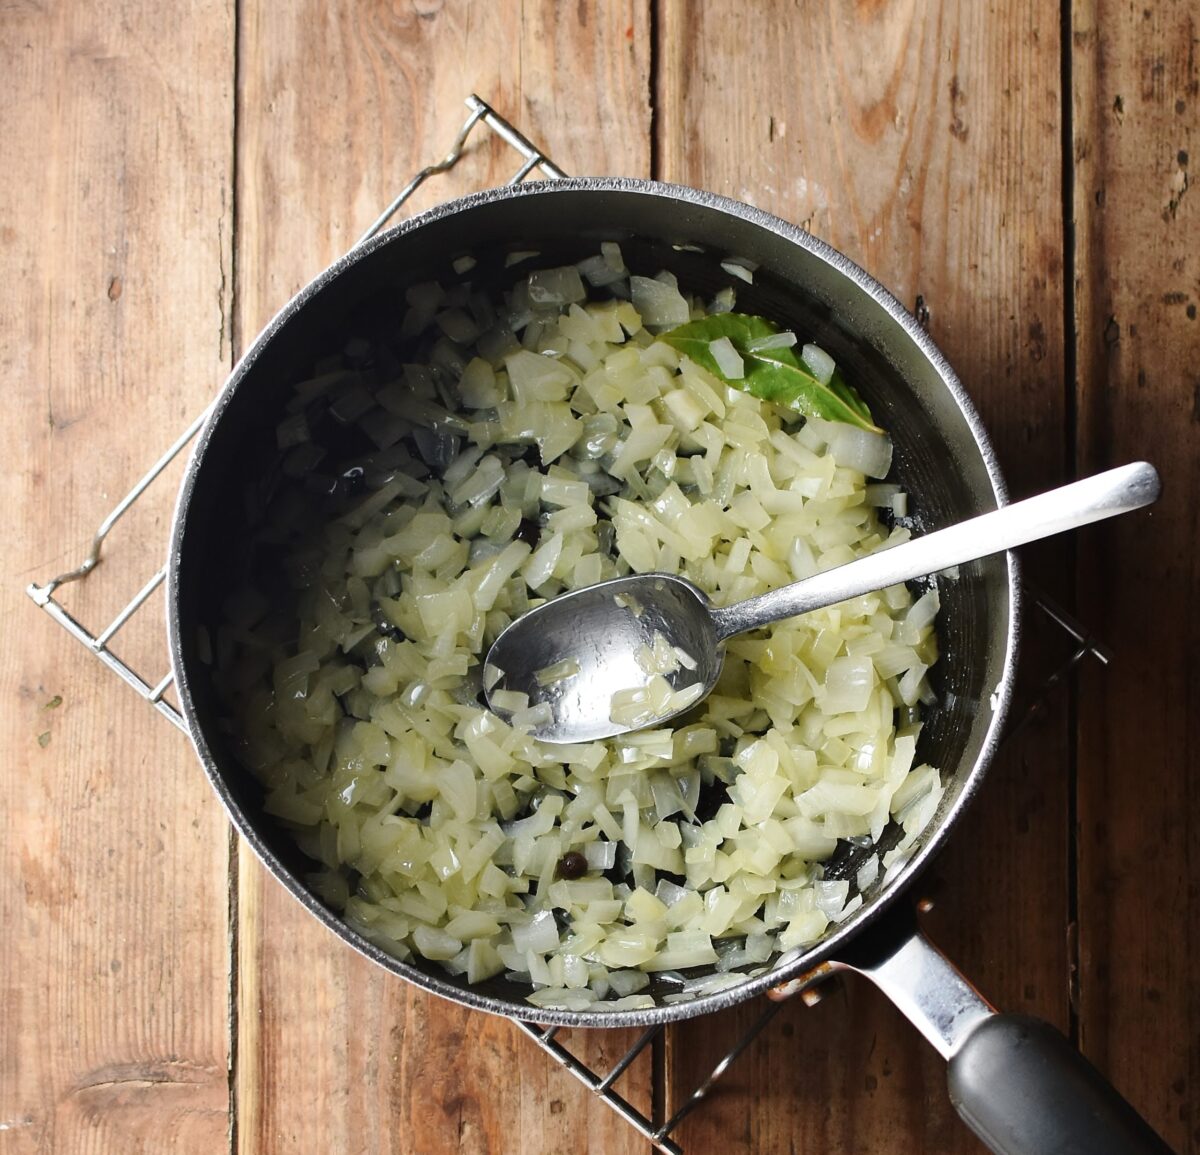 Chopped onions in large pot with spoon. 